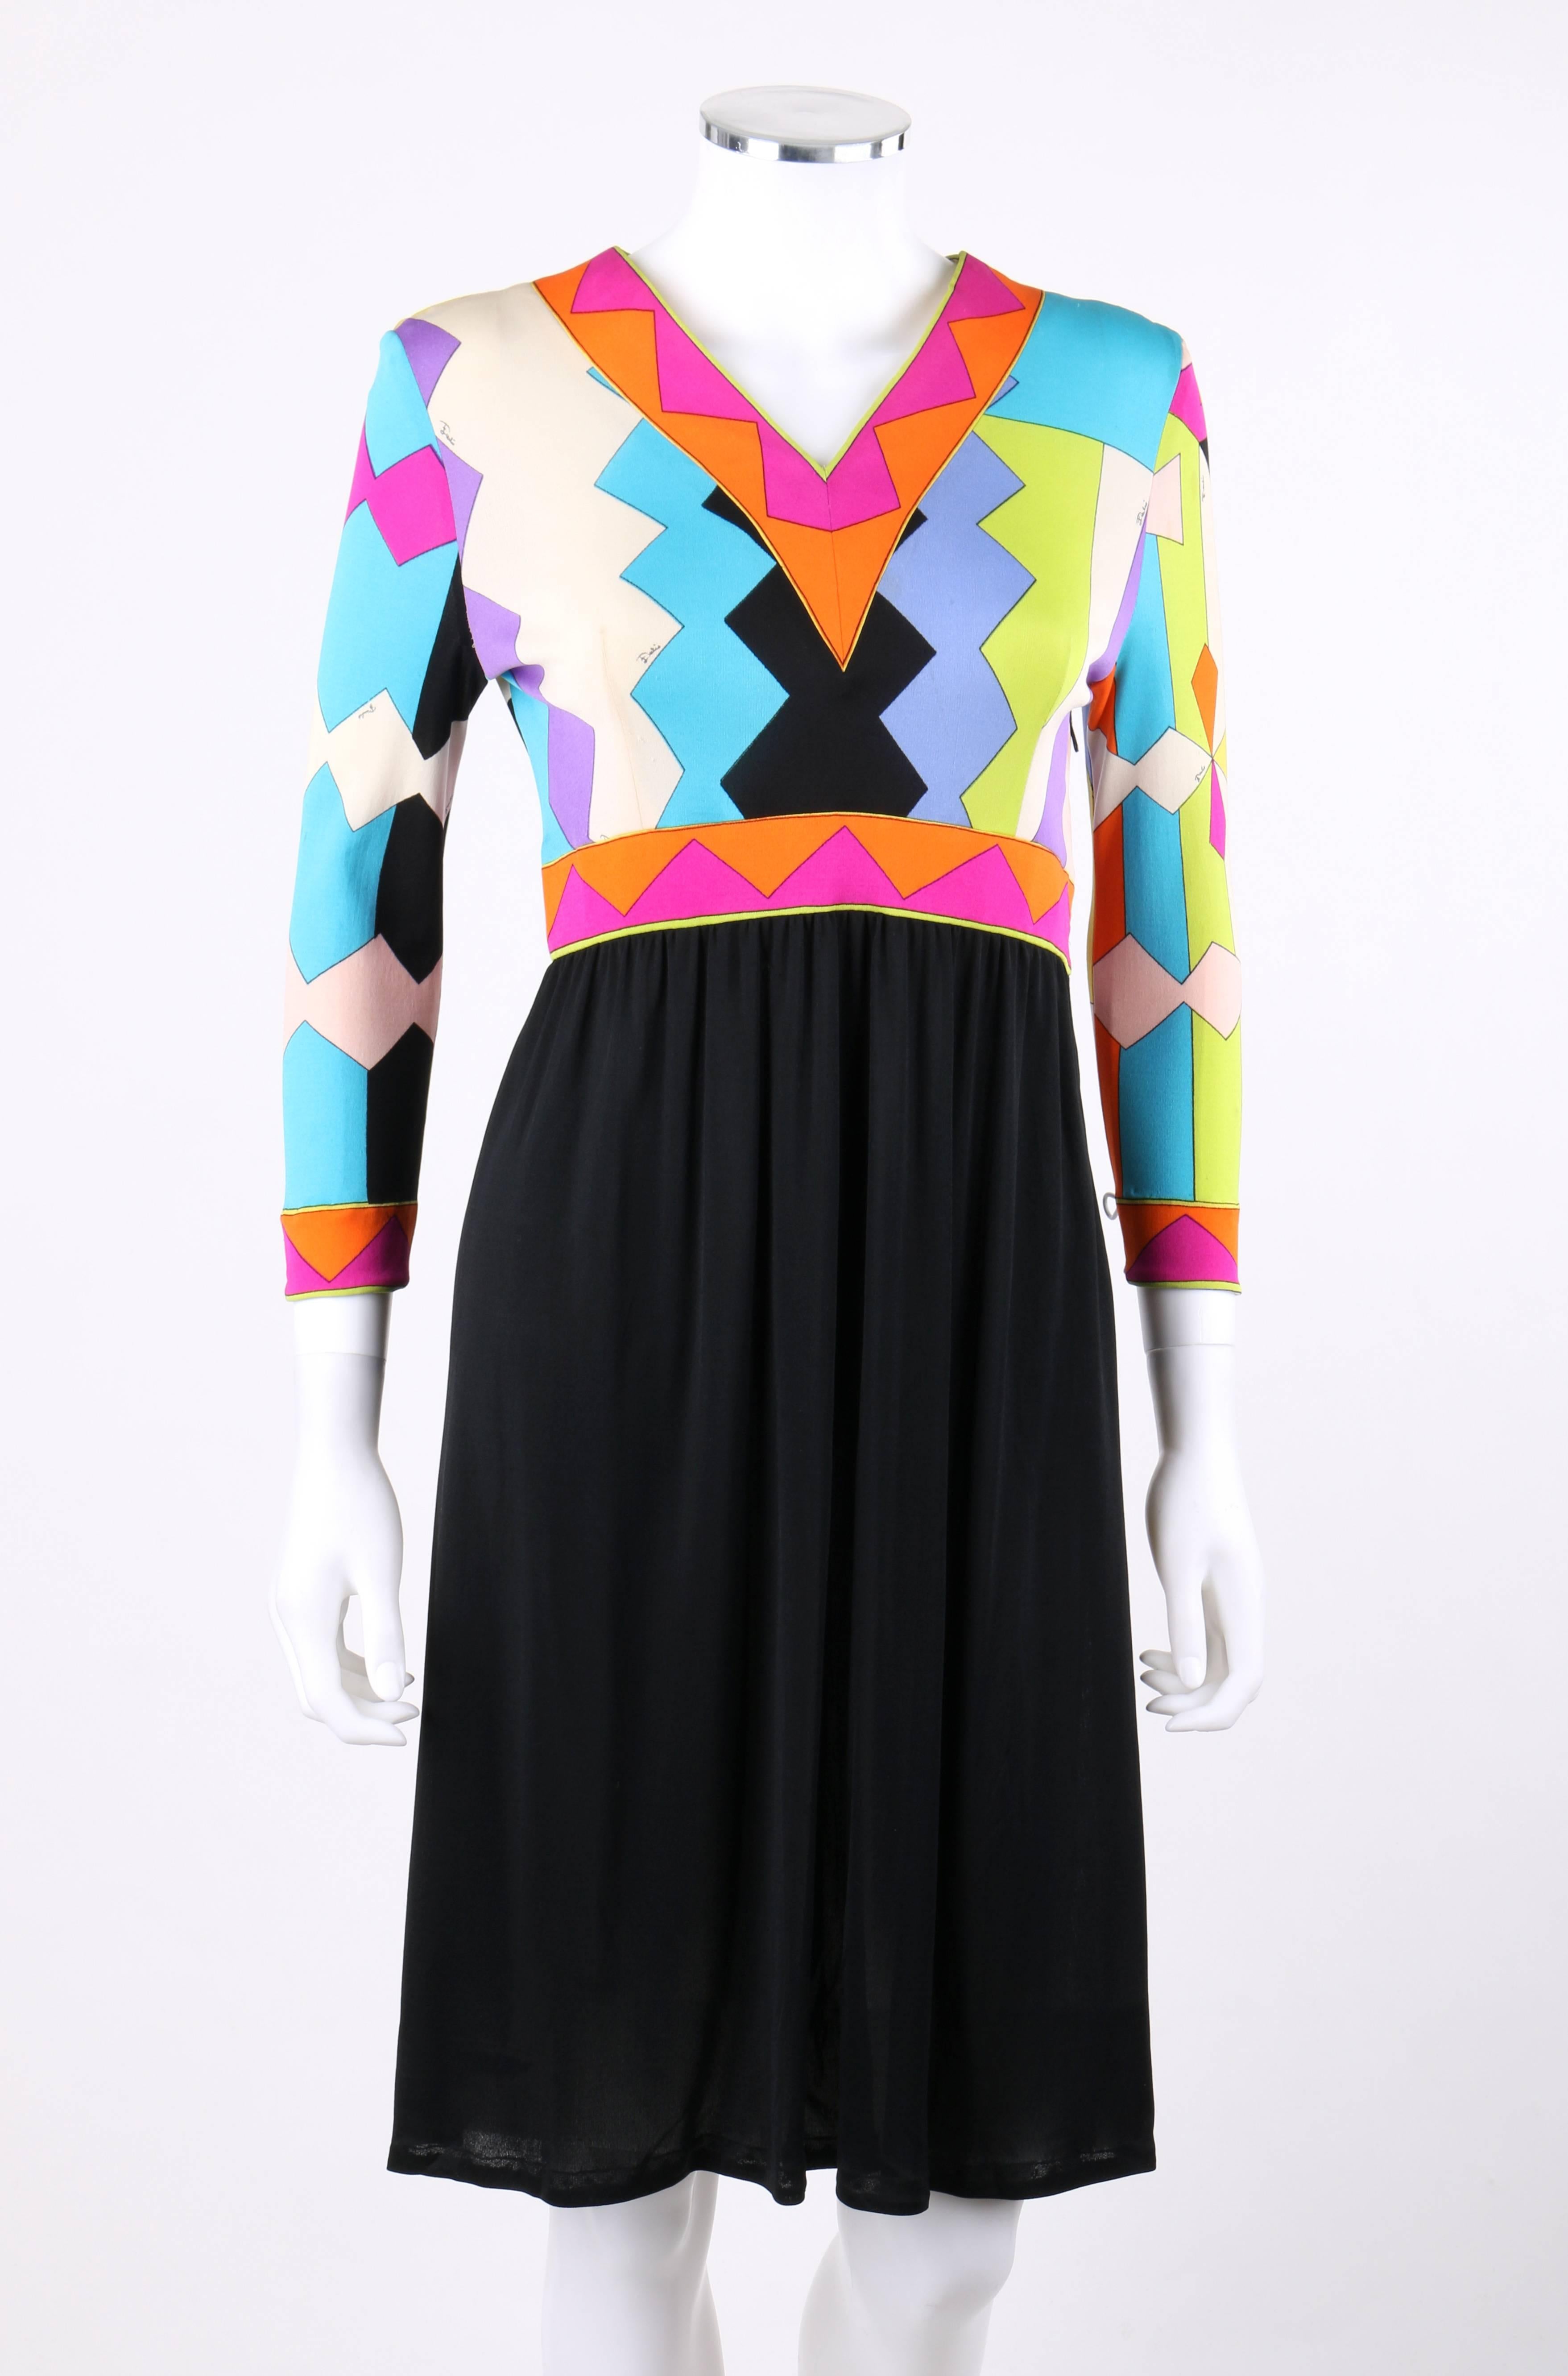 Vintage Emilio Pucci c.1960's geometric signature print silk jersey knit shift dress. Multicolor geometric zig-zag / rectangular print in shades of orange, magenta, yellow, lime, teal blue, white, pink, and black. V-neckline. 3/4 length sleeves.